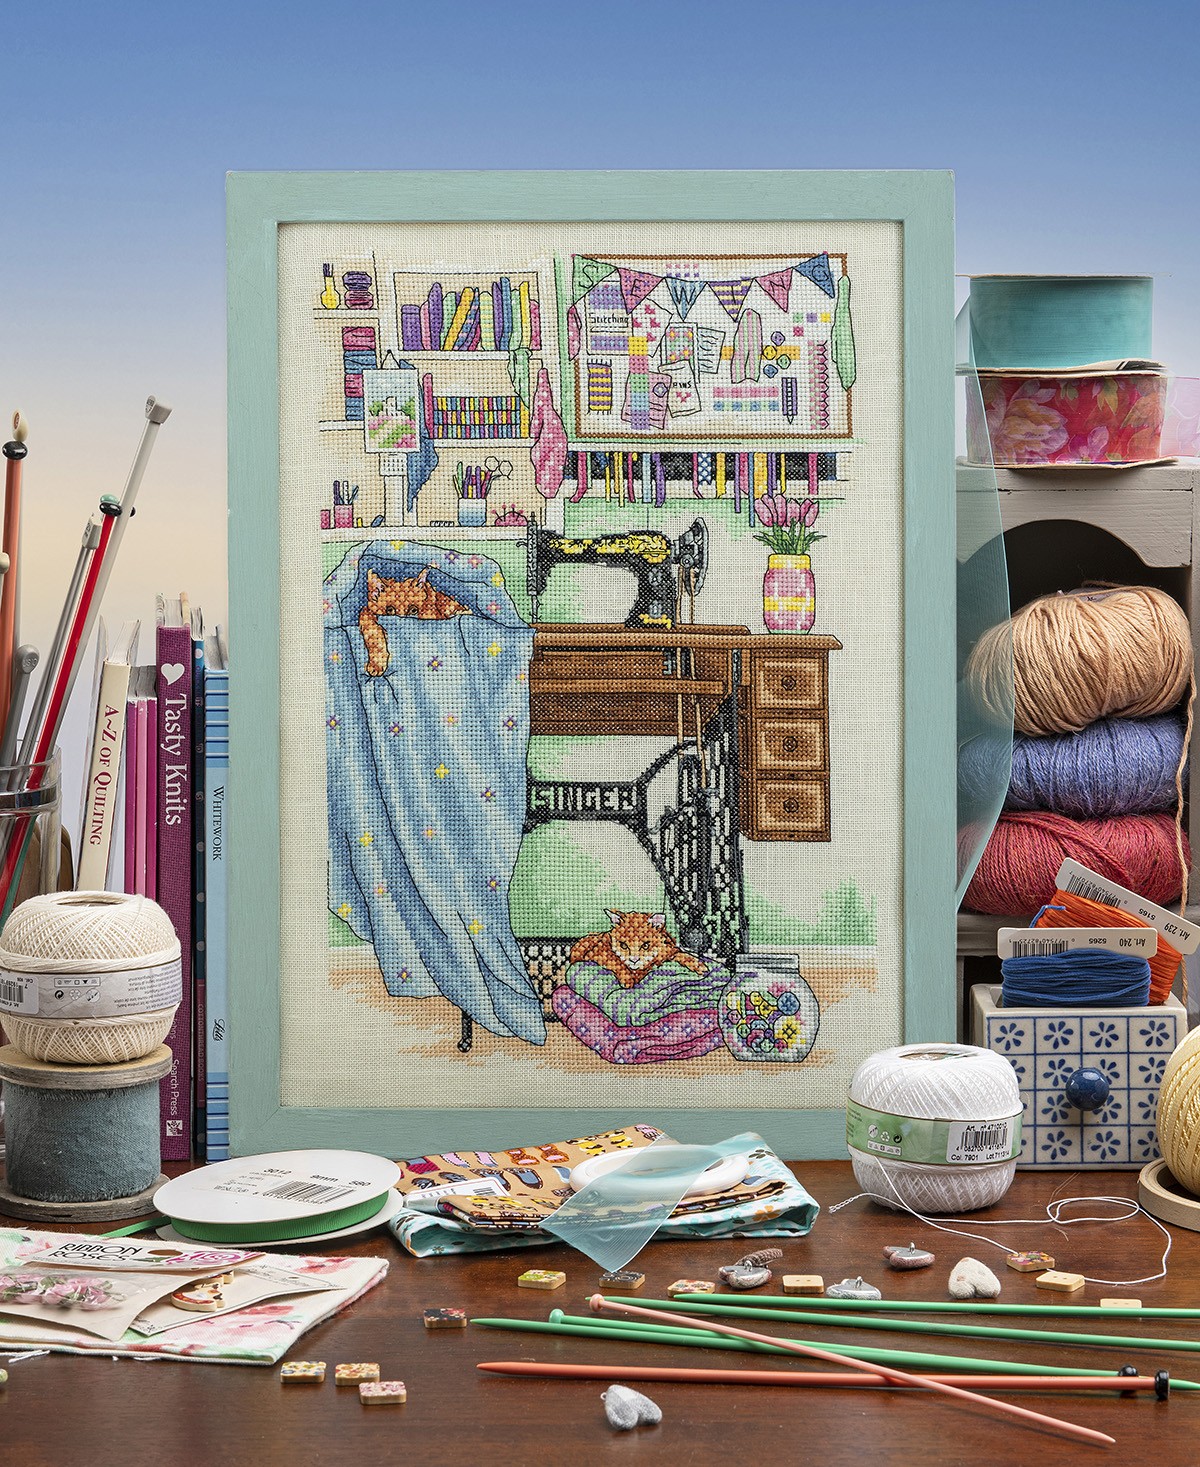 Cross Stitcher Project Pack - issue 393 - Sewing Room - Available in 28 ct Cashel or 14 ct Aida